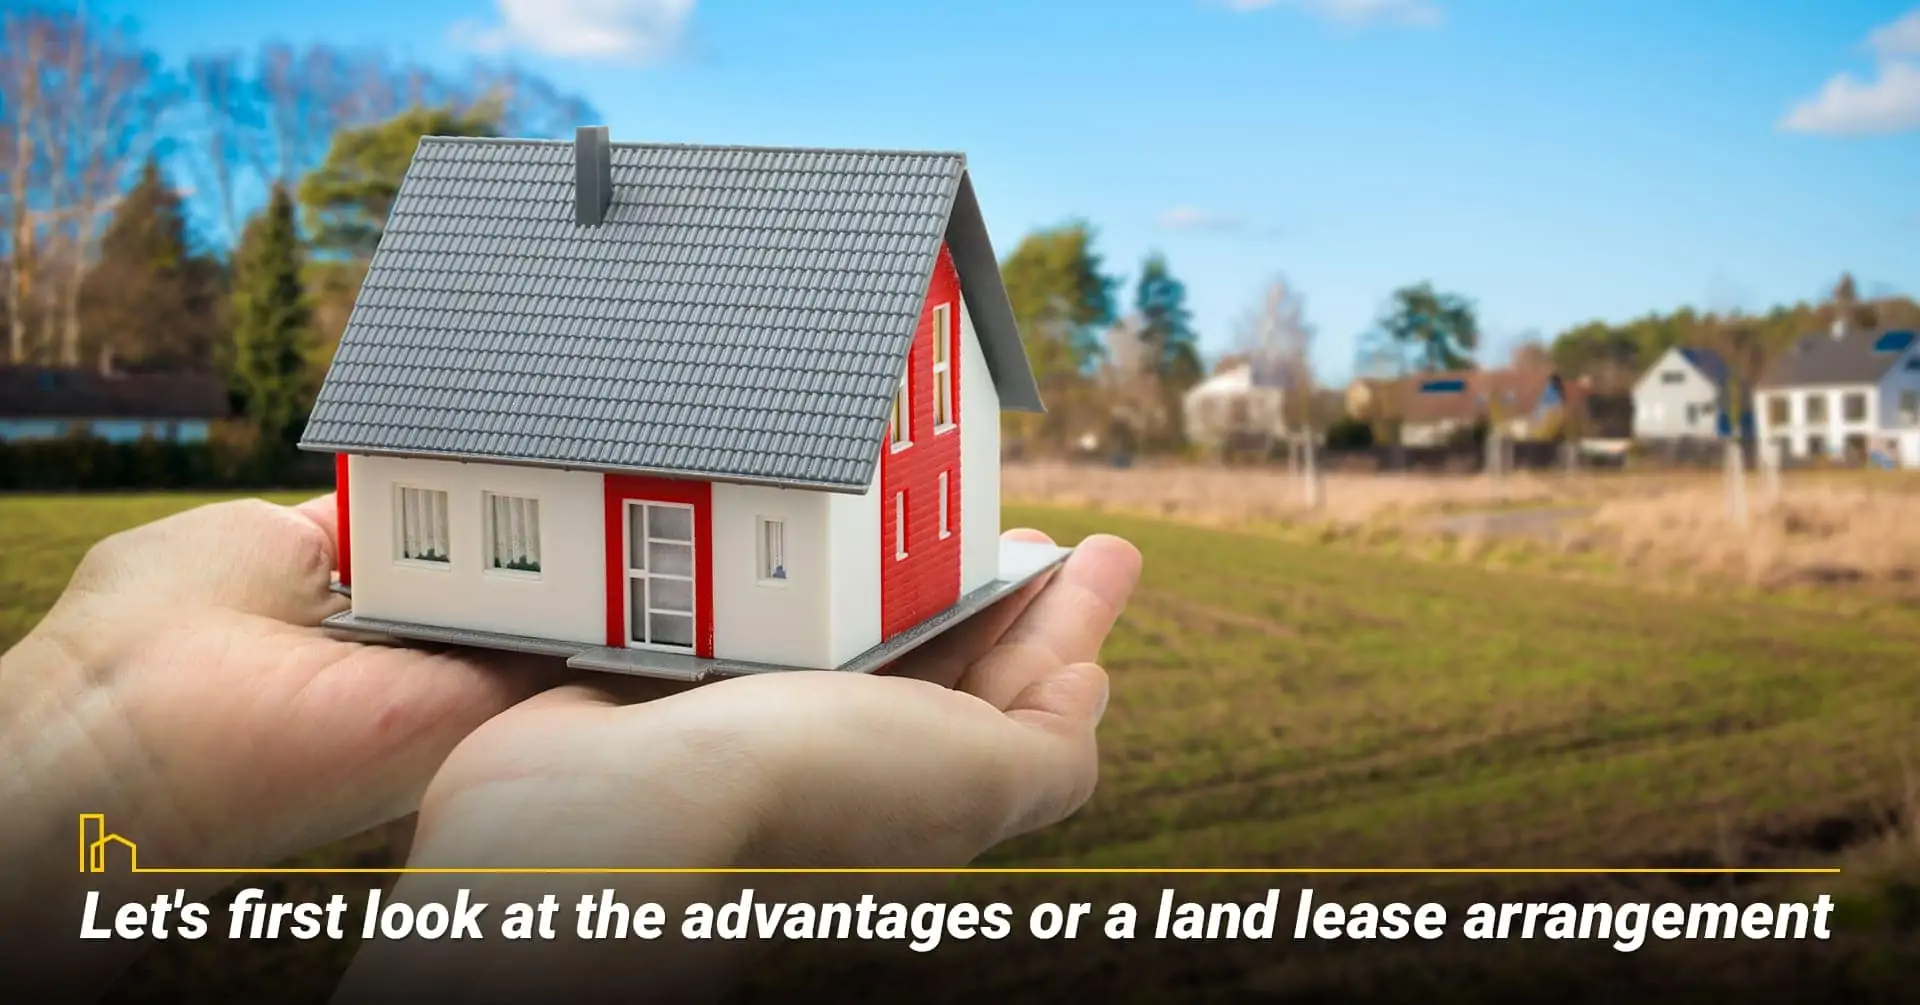 Let's first look at the advantages of a land lease arrangement, the pros of a land lease agreement